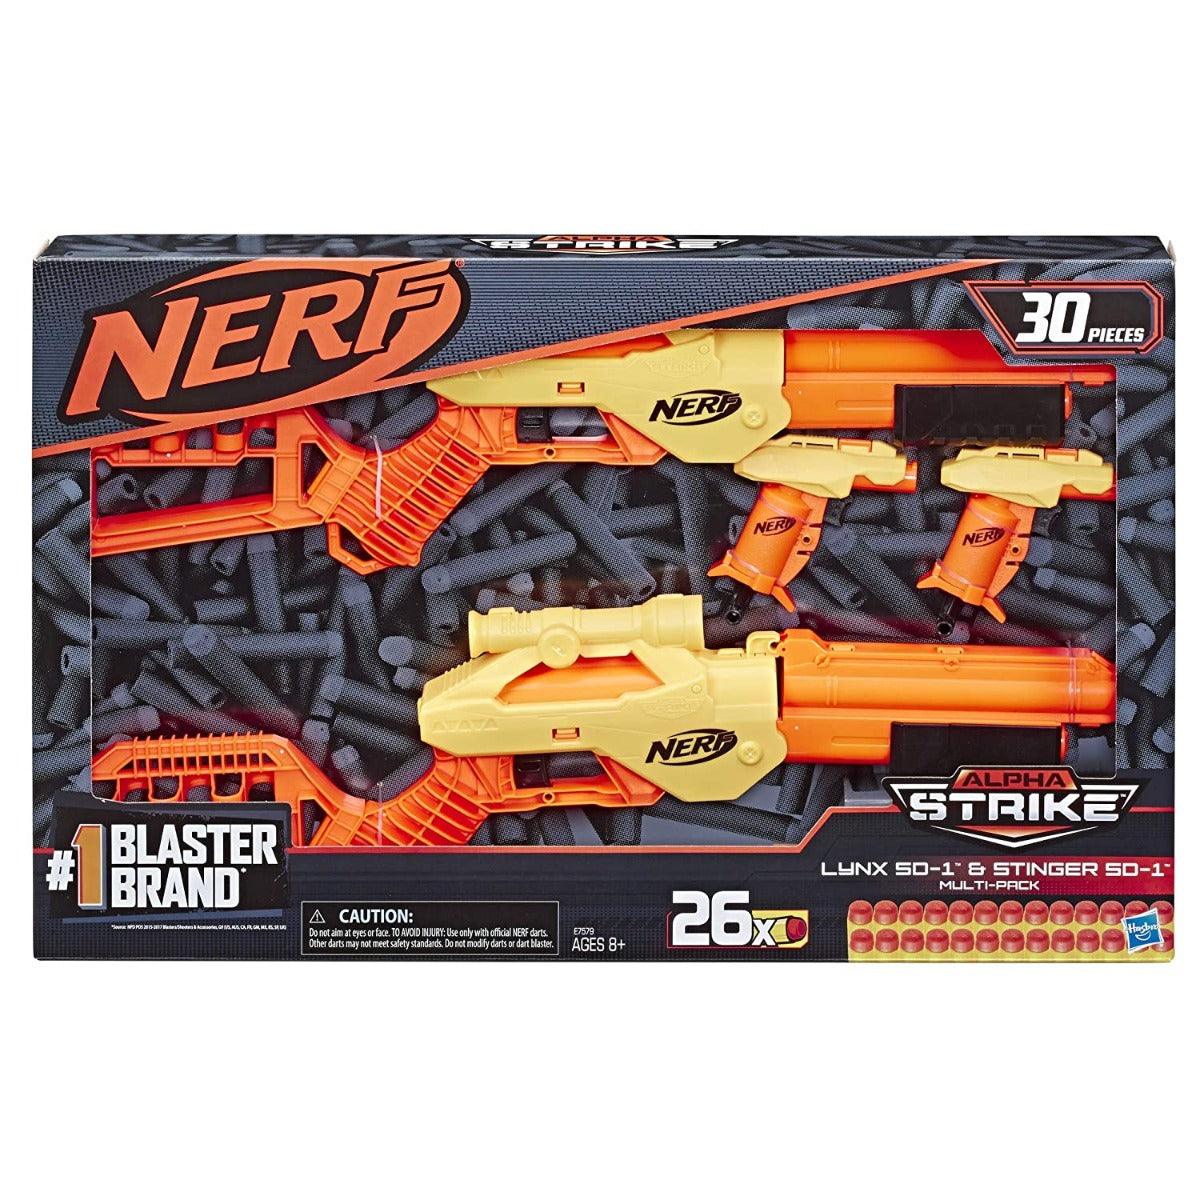 Nerf Alpha Strike Lynx SD-1 and Stinger SD-1 Multi-Pack - Includes 4 Blasters and 26 Official Nerf Elite Darts -- For Kids, Teens, Adults